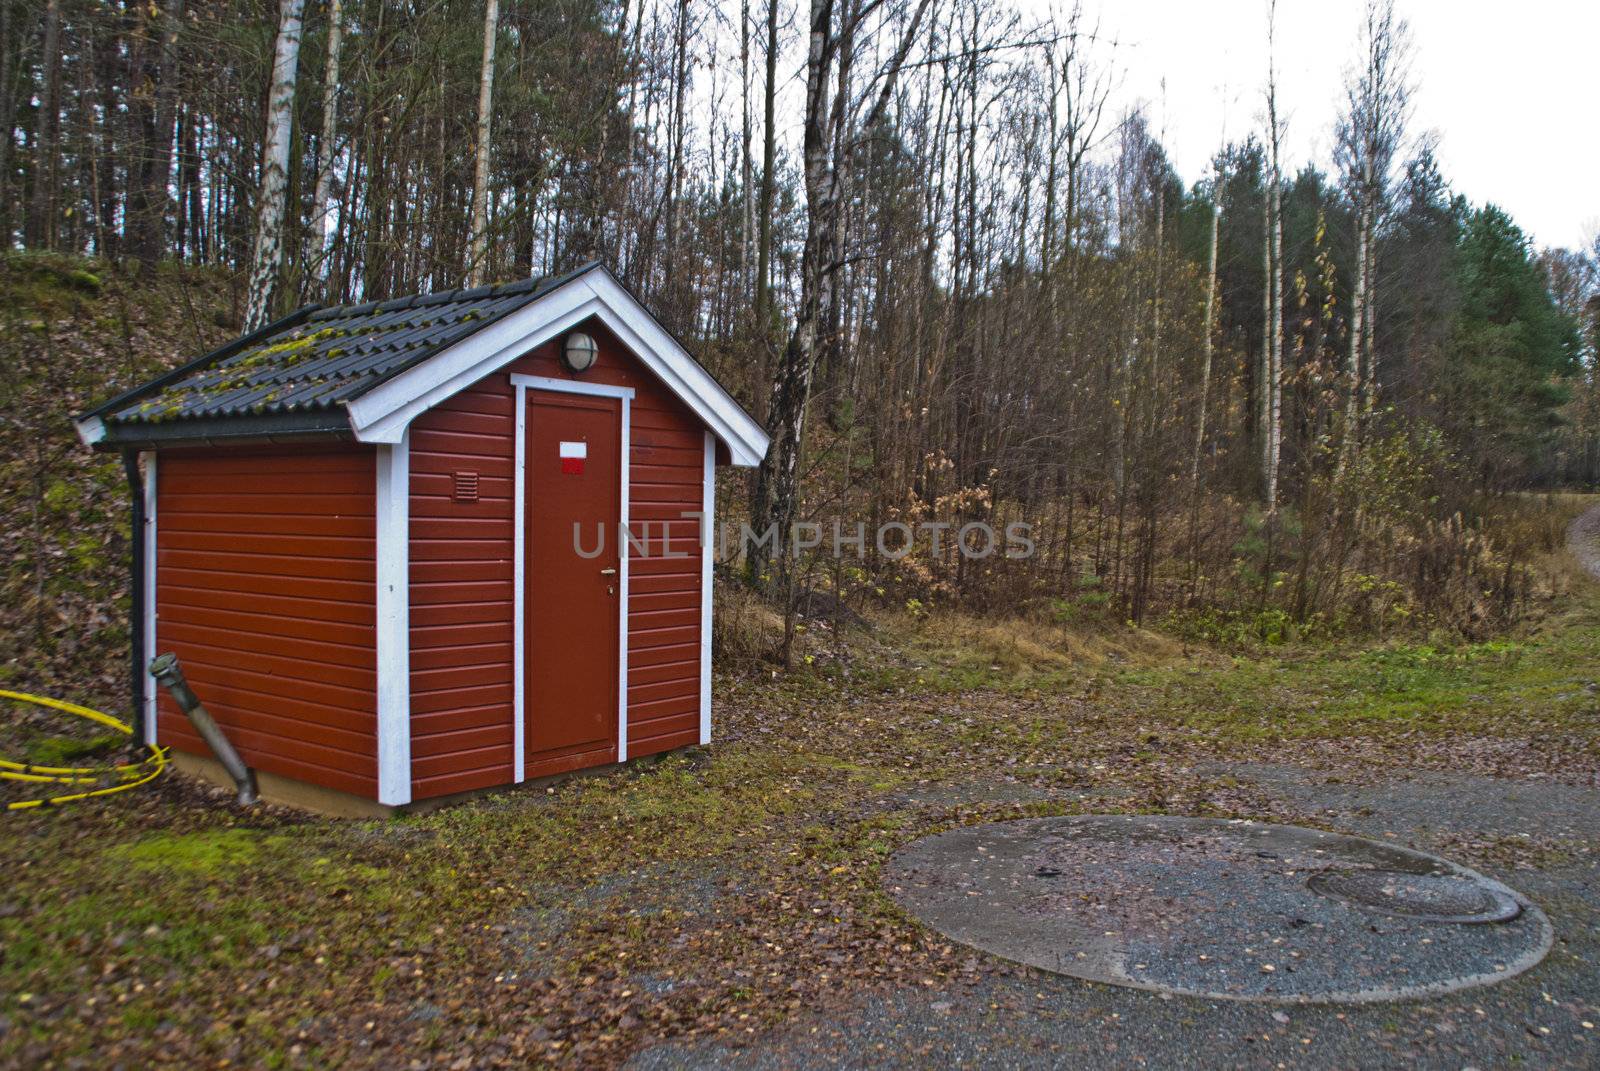 photo is shot near the femsjøen (five sea) in halden and shows a small red water pump house